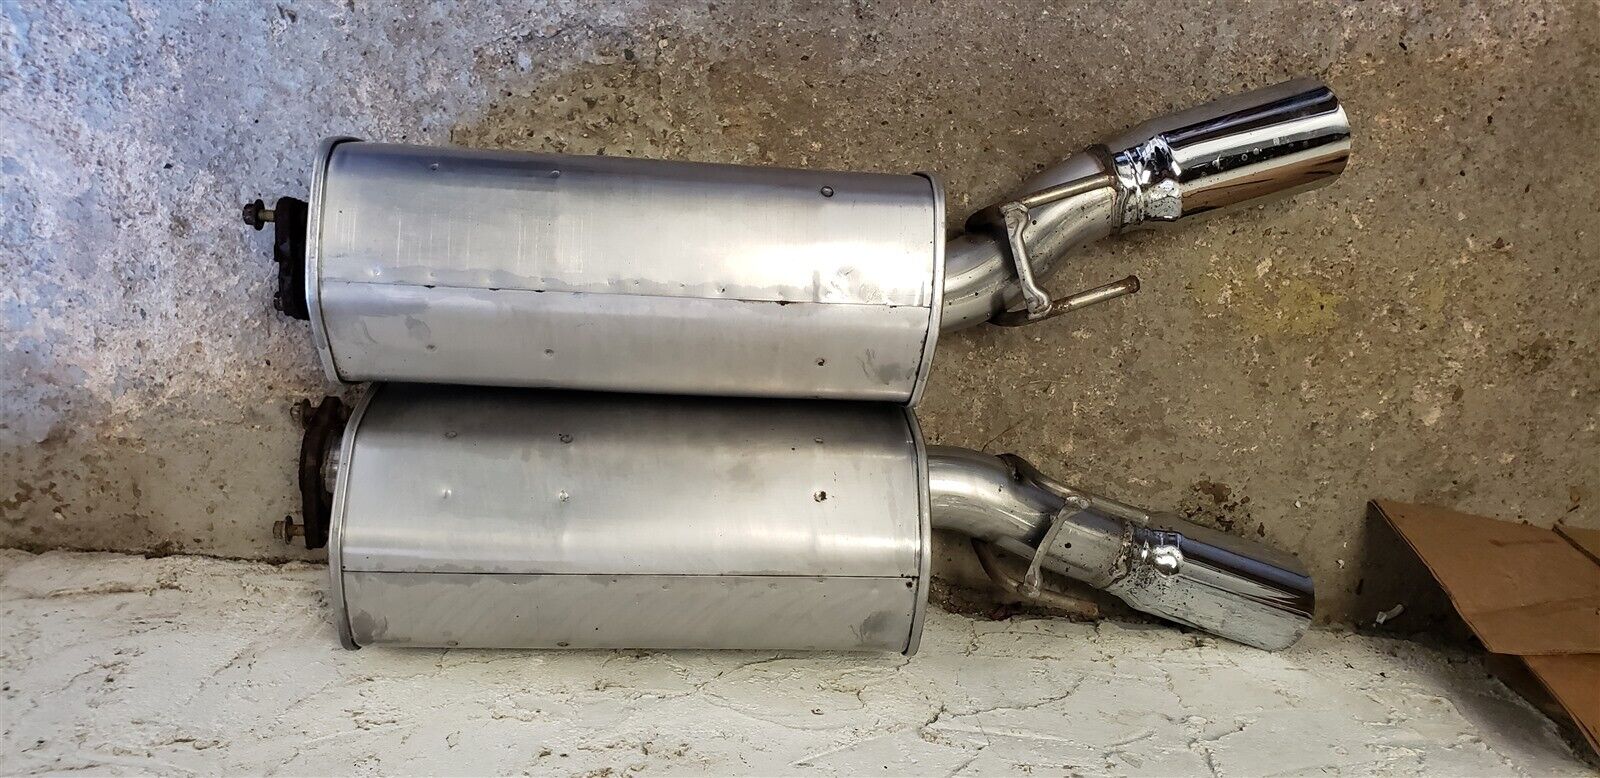 05 06 GTO Stock Exhaust Muffler Both Sides PAIR with TIPS GOOD USED